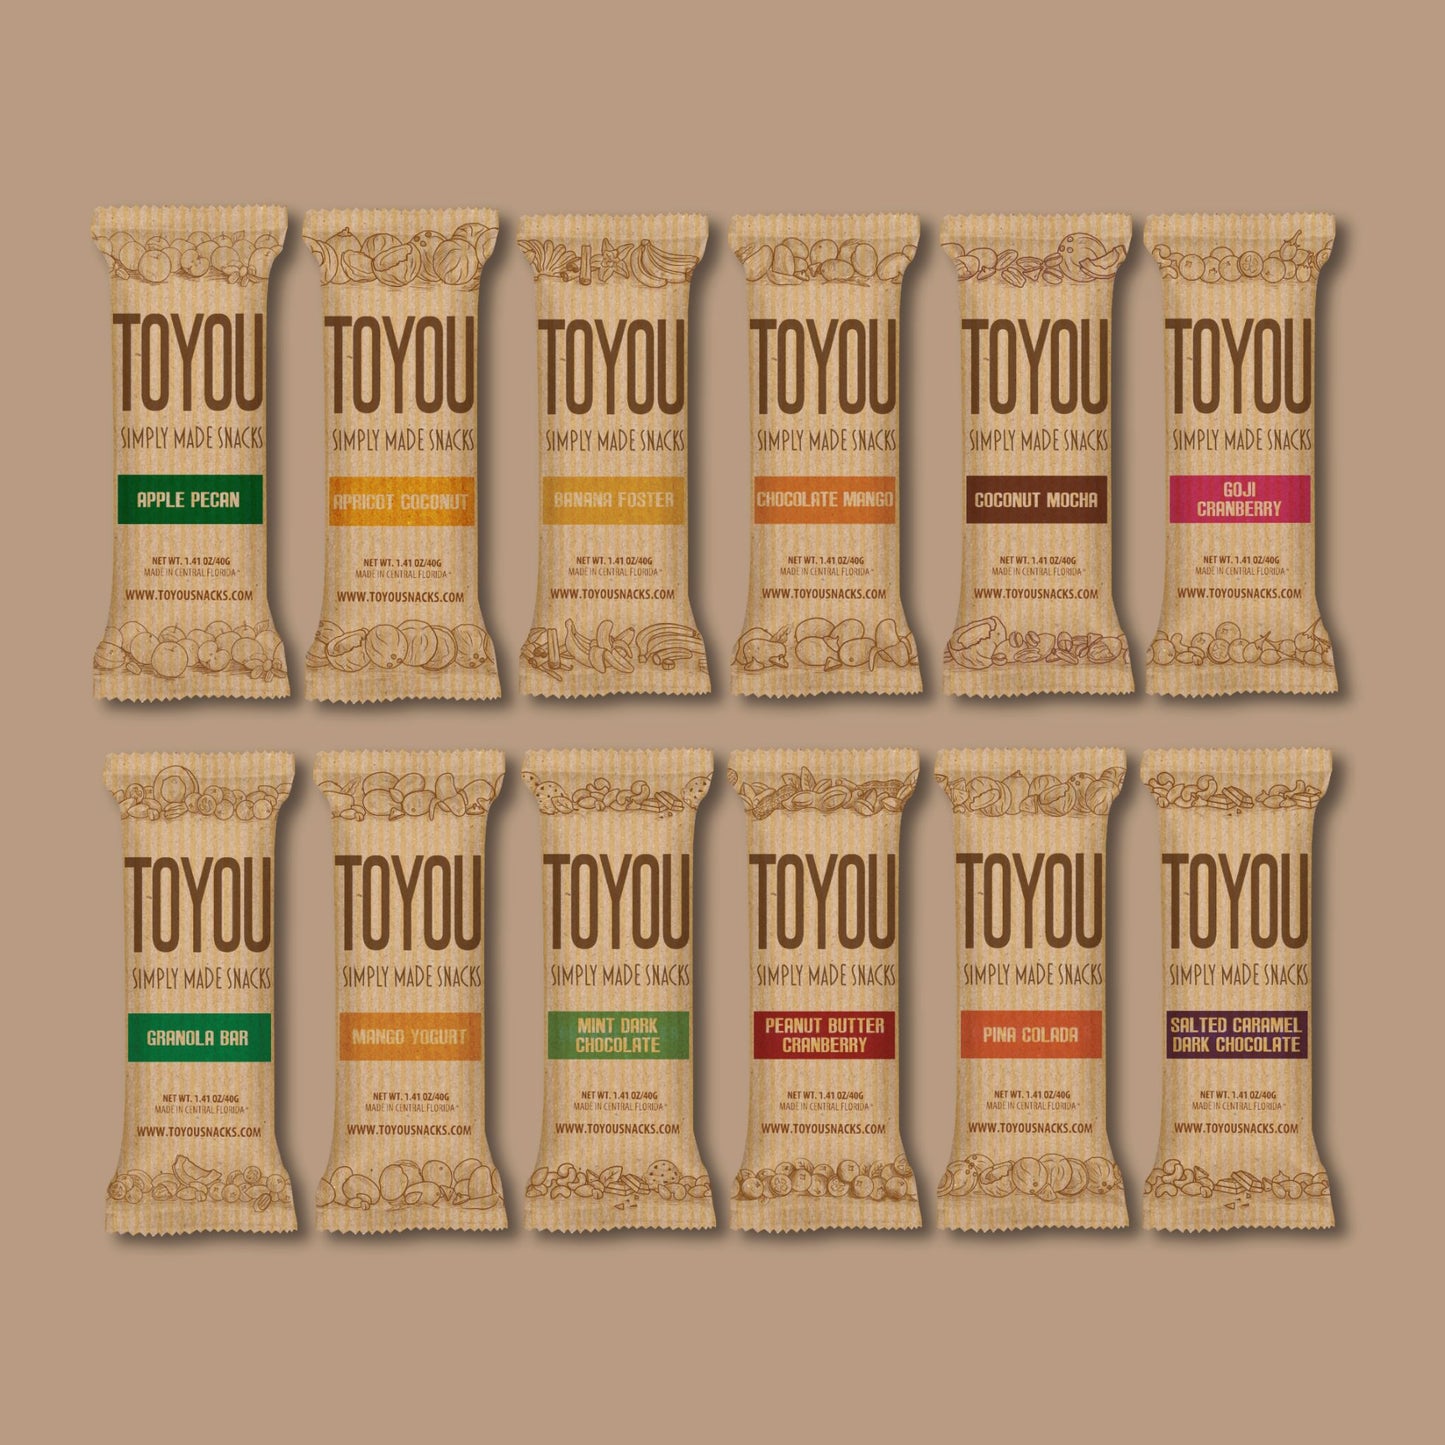 Front view: 12 ToYou Snack Bar Flavors in artistic paper wrappers on light brown paper texture.